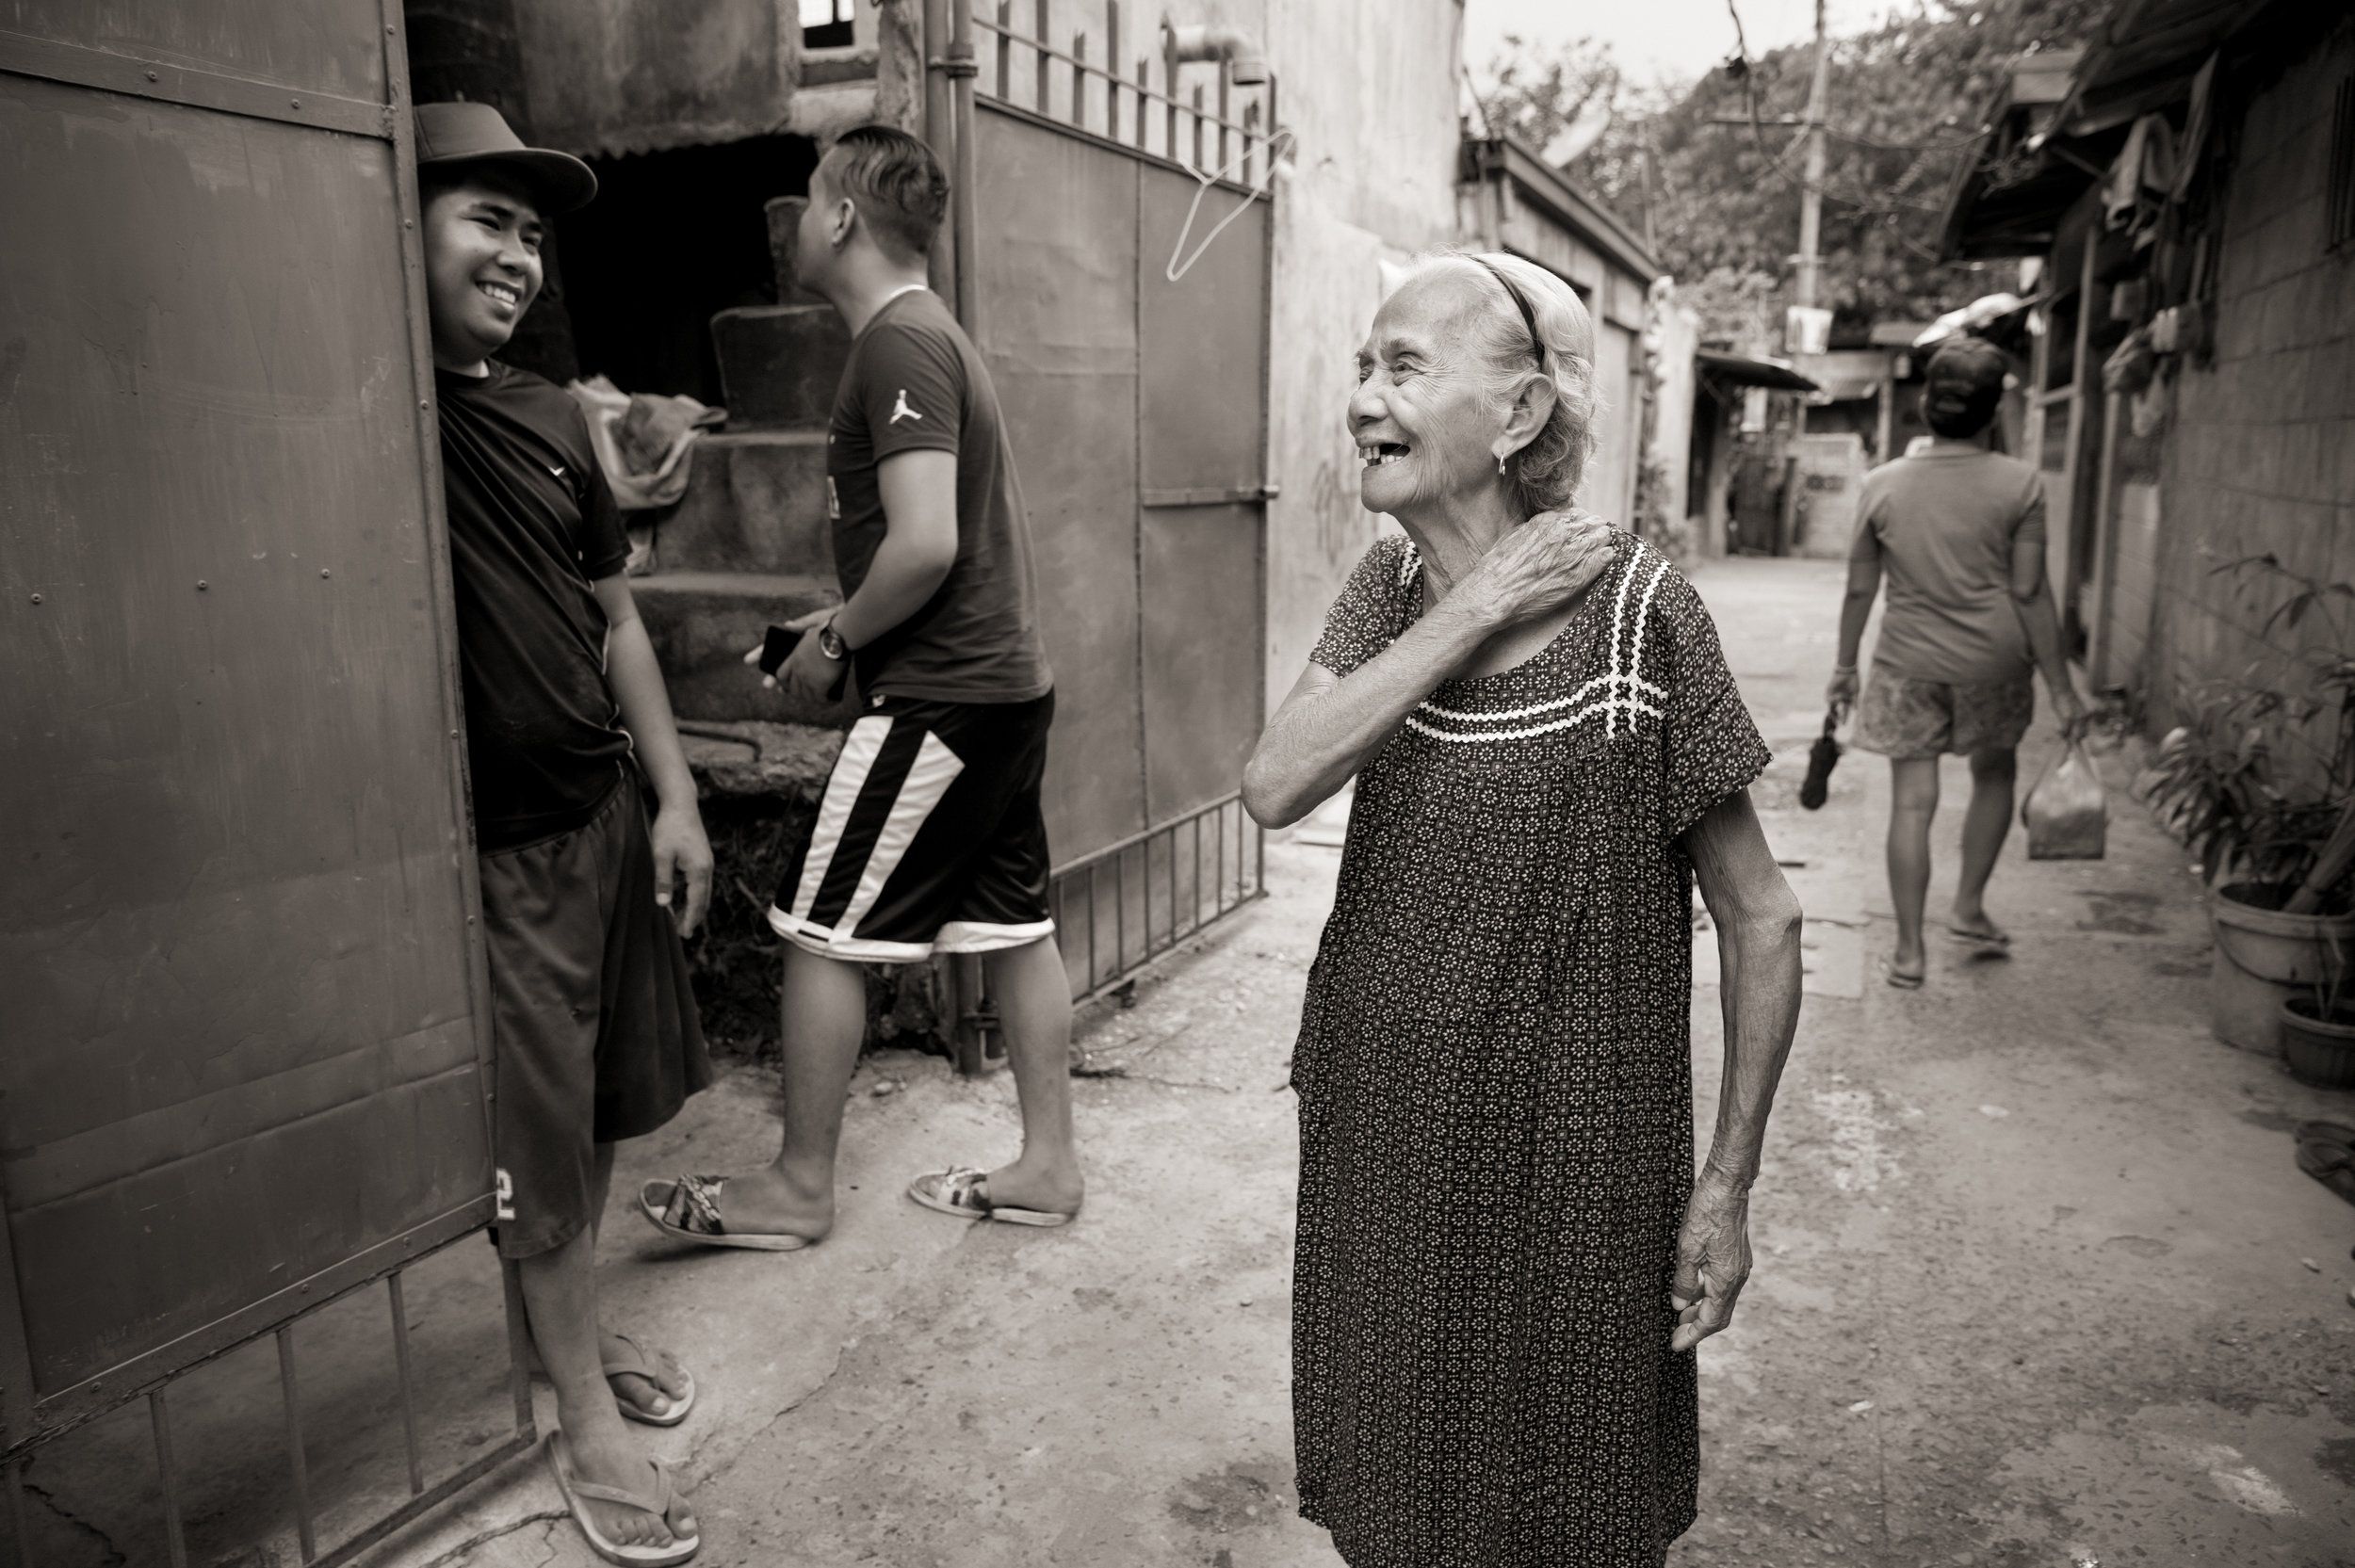 Narcisa Claveria laughs with neighbors in this 2019 photo. Even in the coronavirus pandemic, she goes out, wearing a mask. "I'd rather die in the streets," she says, "than stay dying of sadness at home." Image by Cheryl Diaz Meyer. Philippines, 2019.